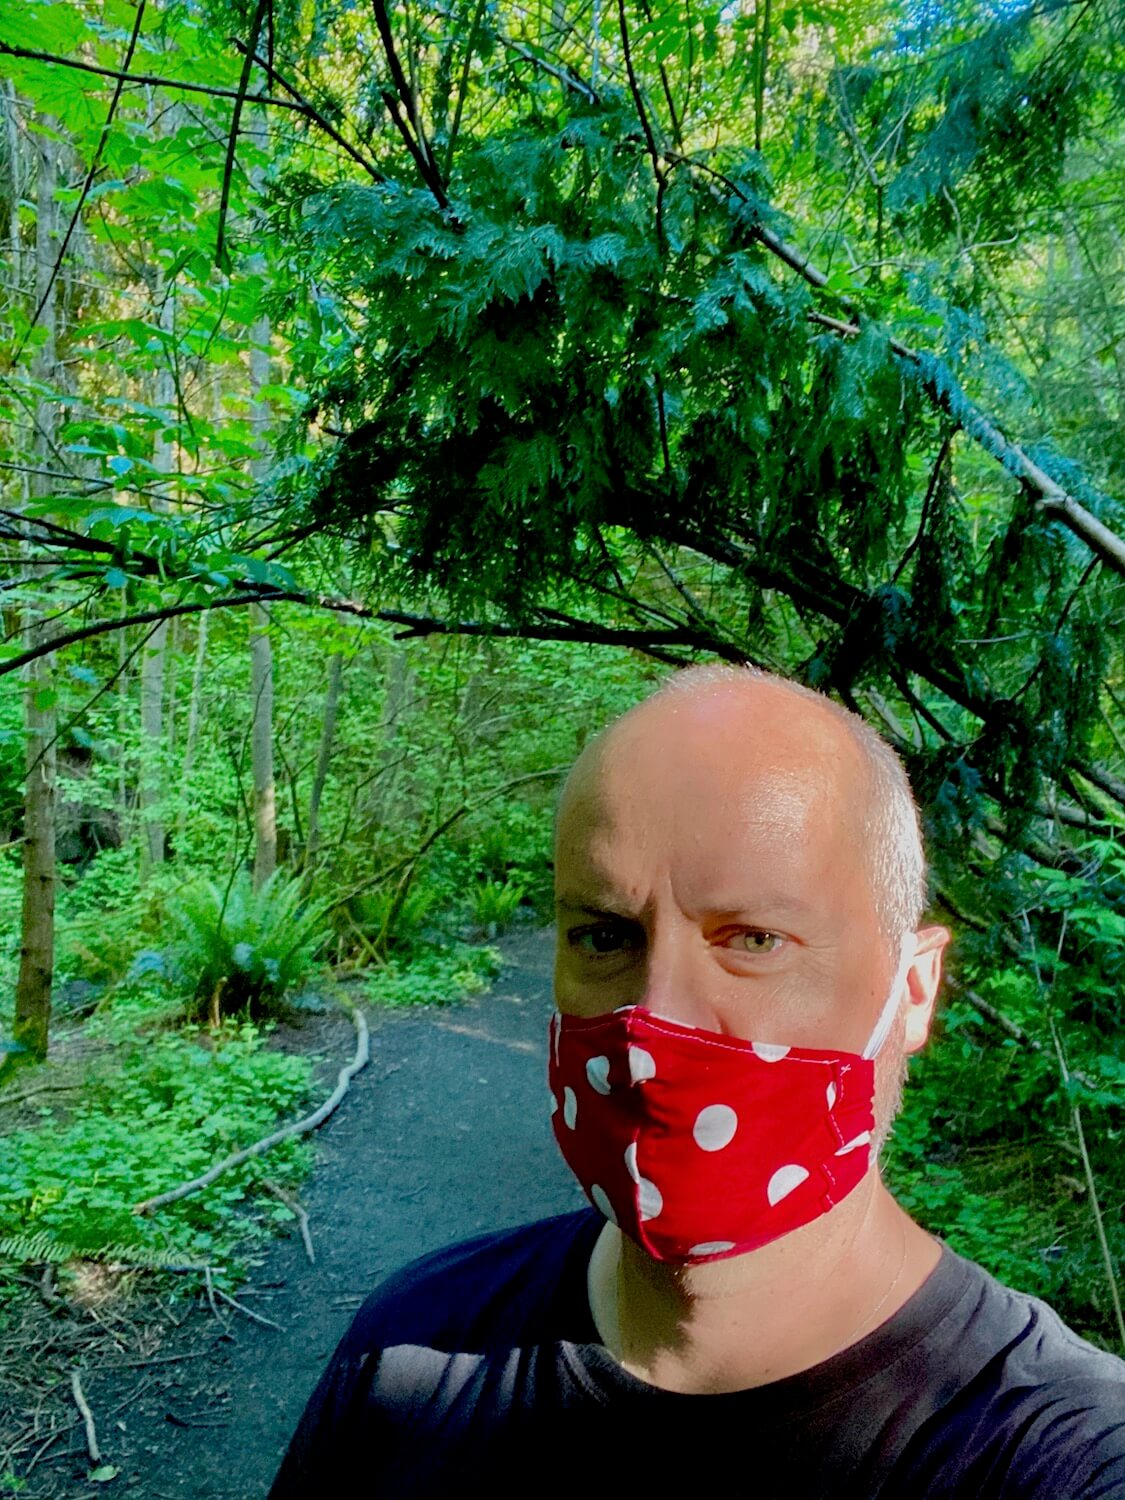 This is a selfie of Matthew Kessi while on a trail in the Schmitz Preserve, which is on Alki Point in West Seattle. There is a gravel pathway leading into a thick forest of green ferns, fir trees and other thick foliage.